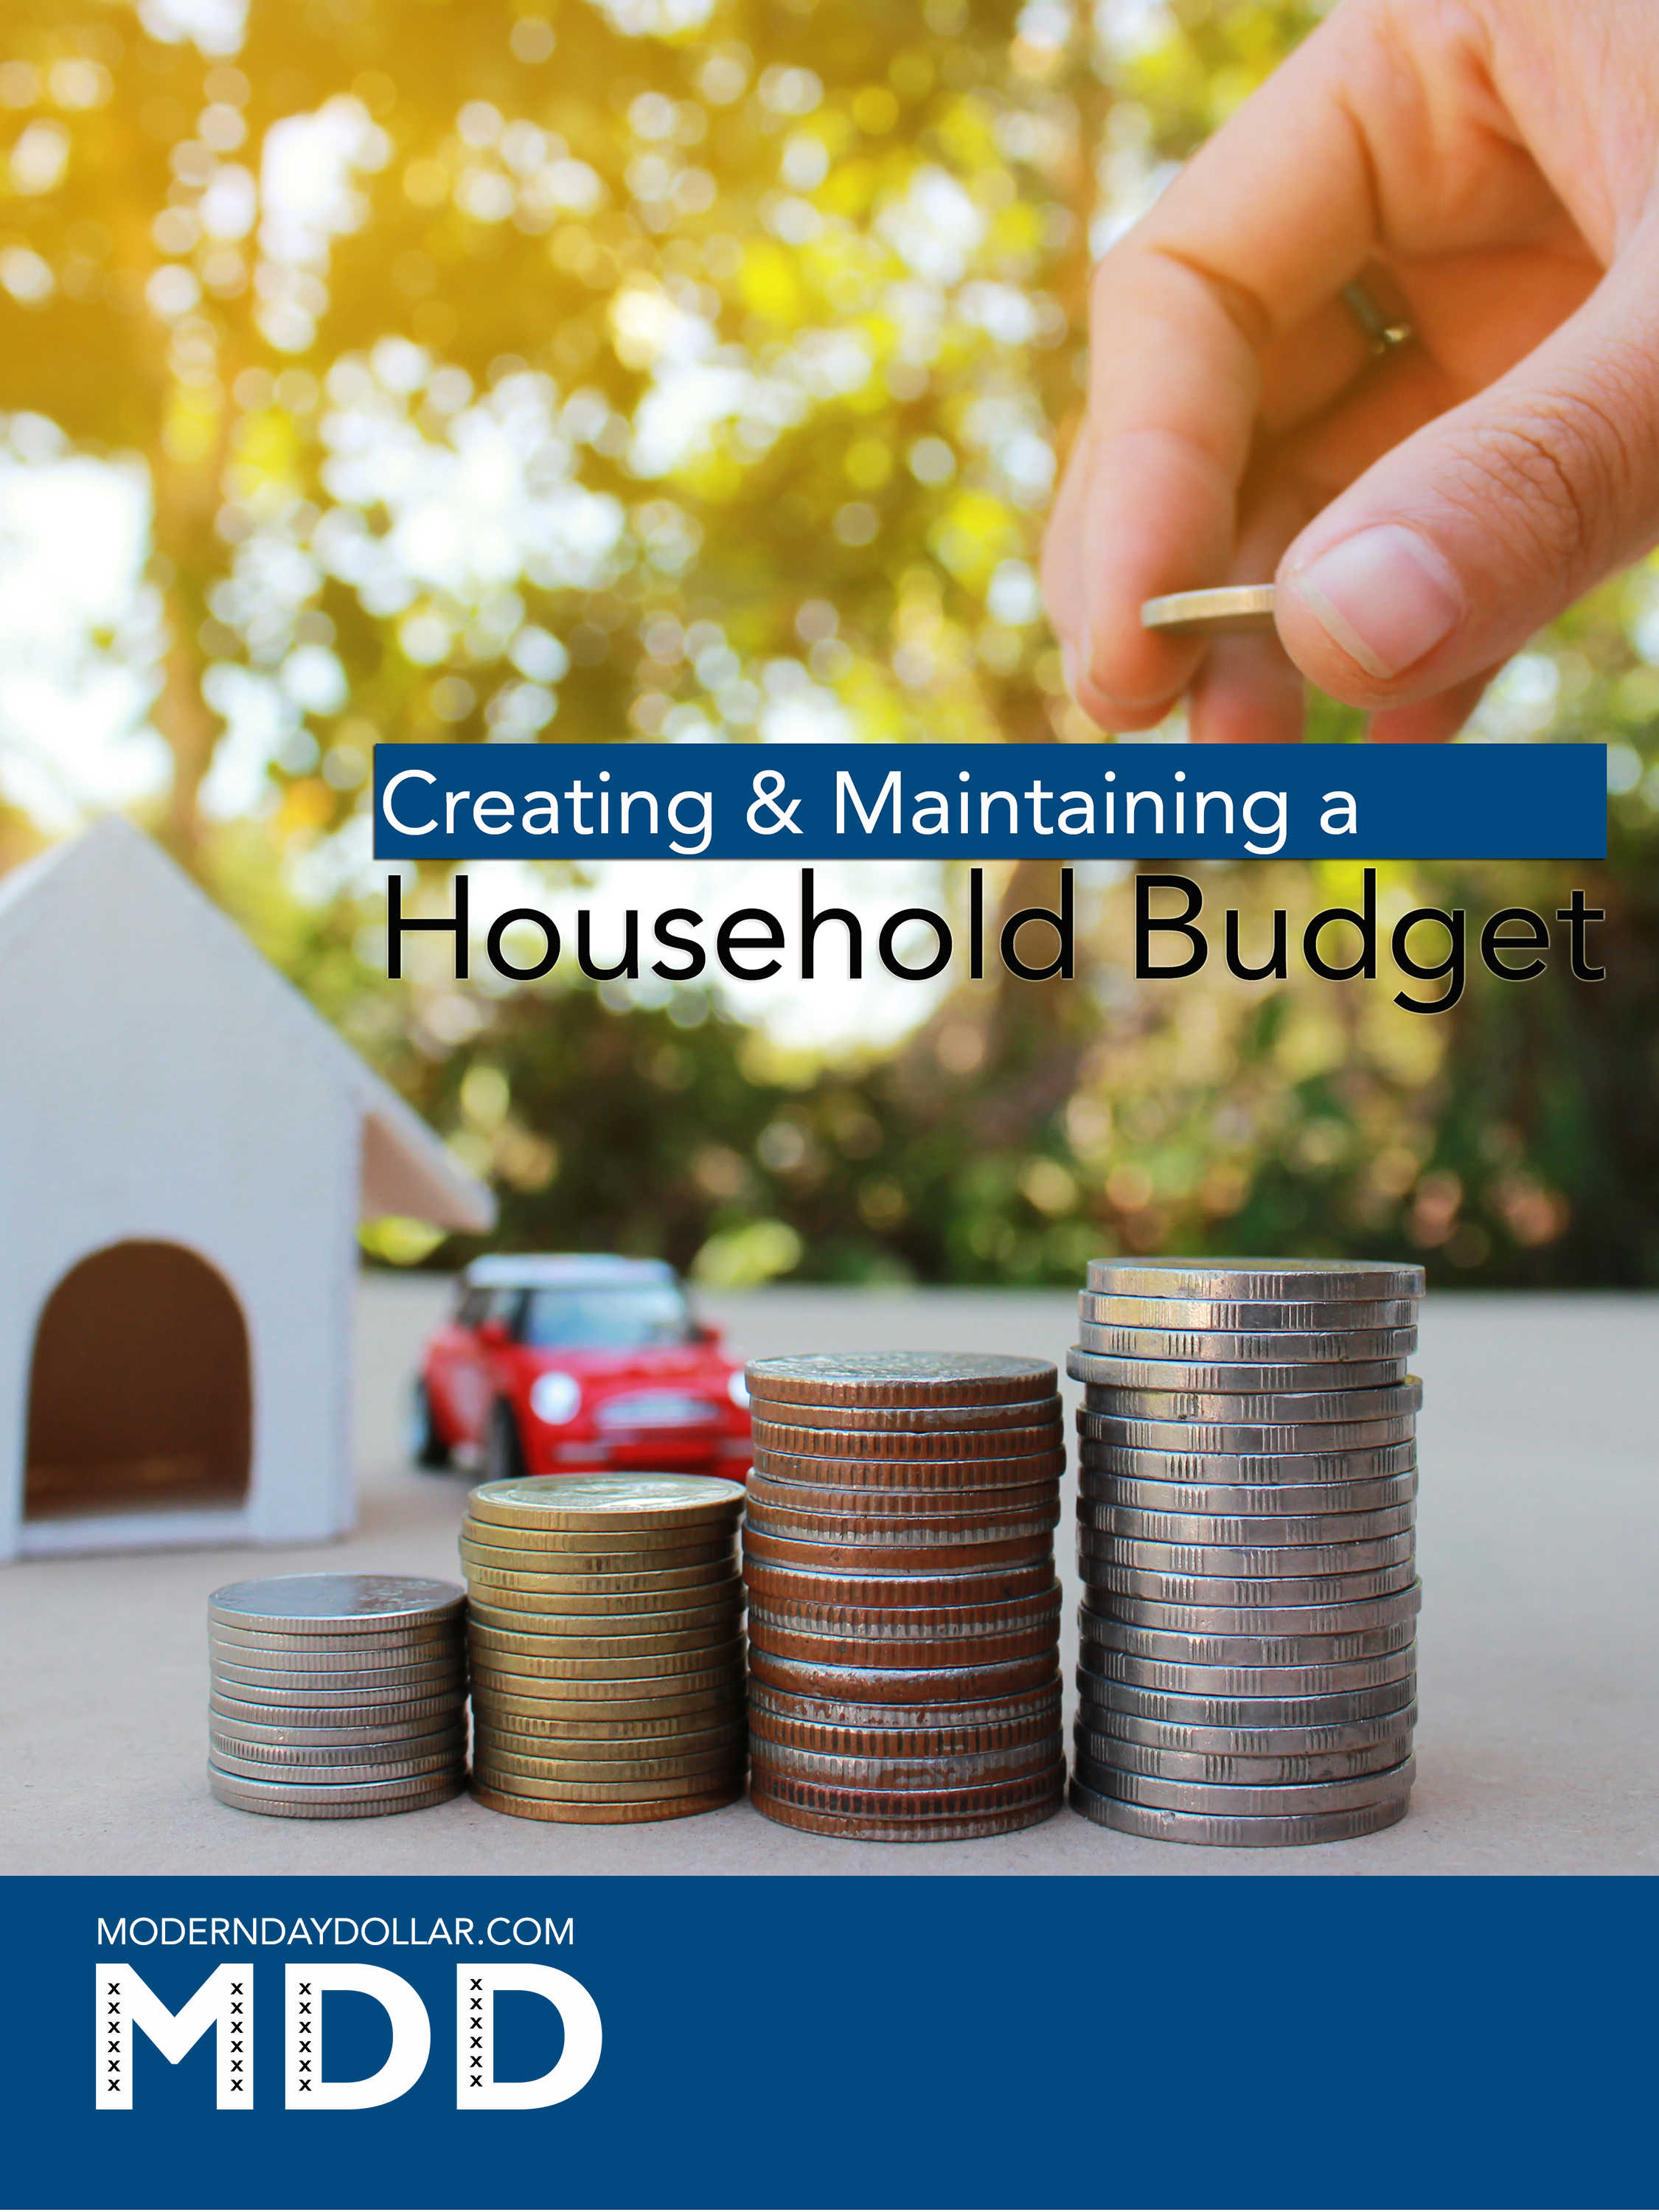 How to Create a Household Budget